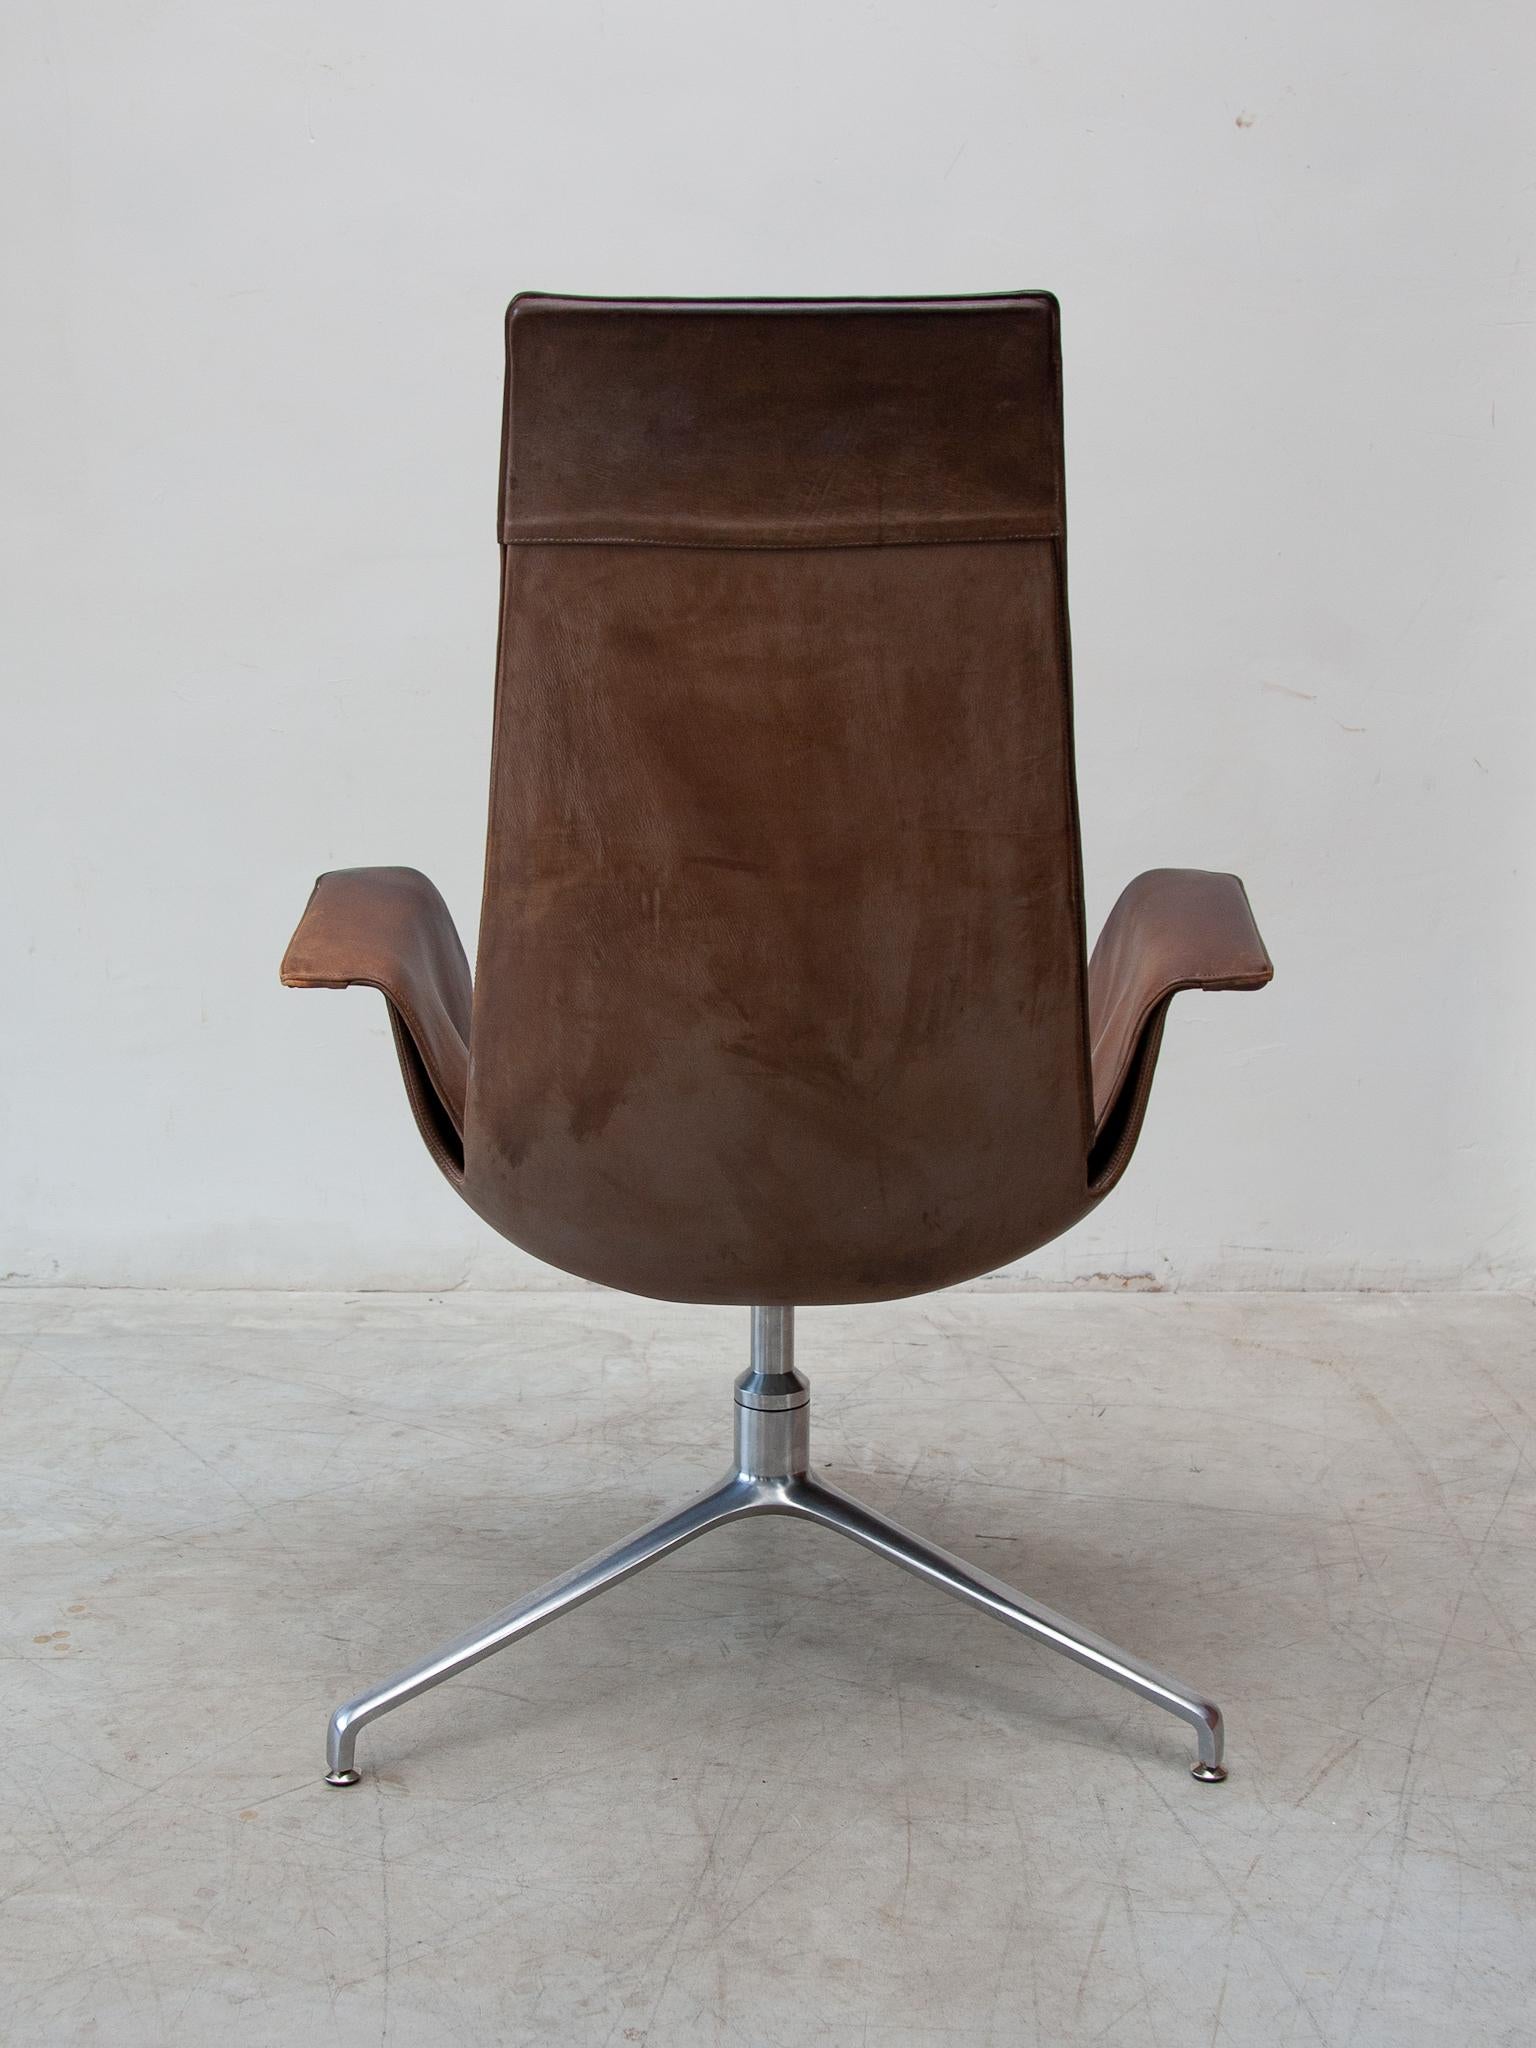 Fabricius & Kastholm FK6725 Desk, Lounge Chair in Brown Leather, Kill 3